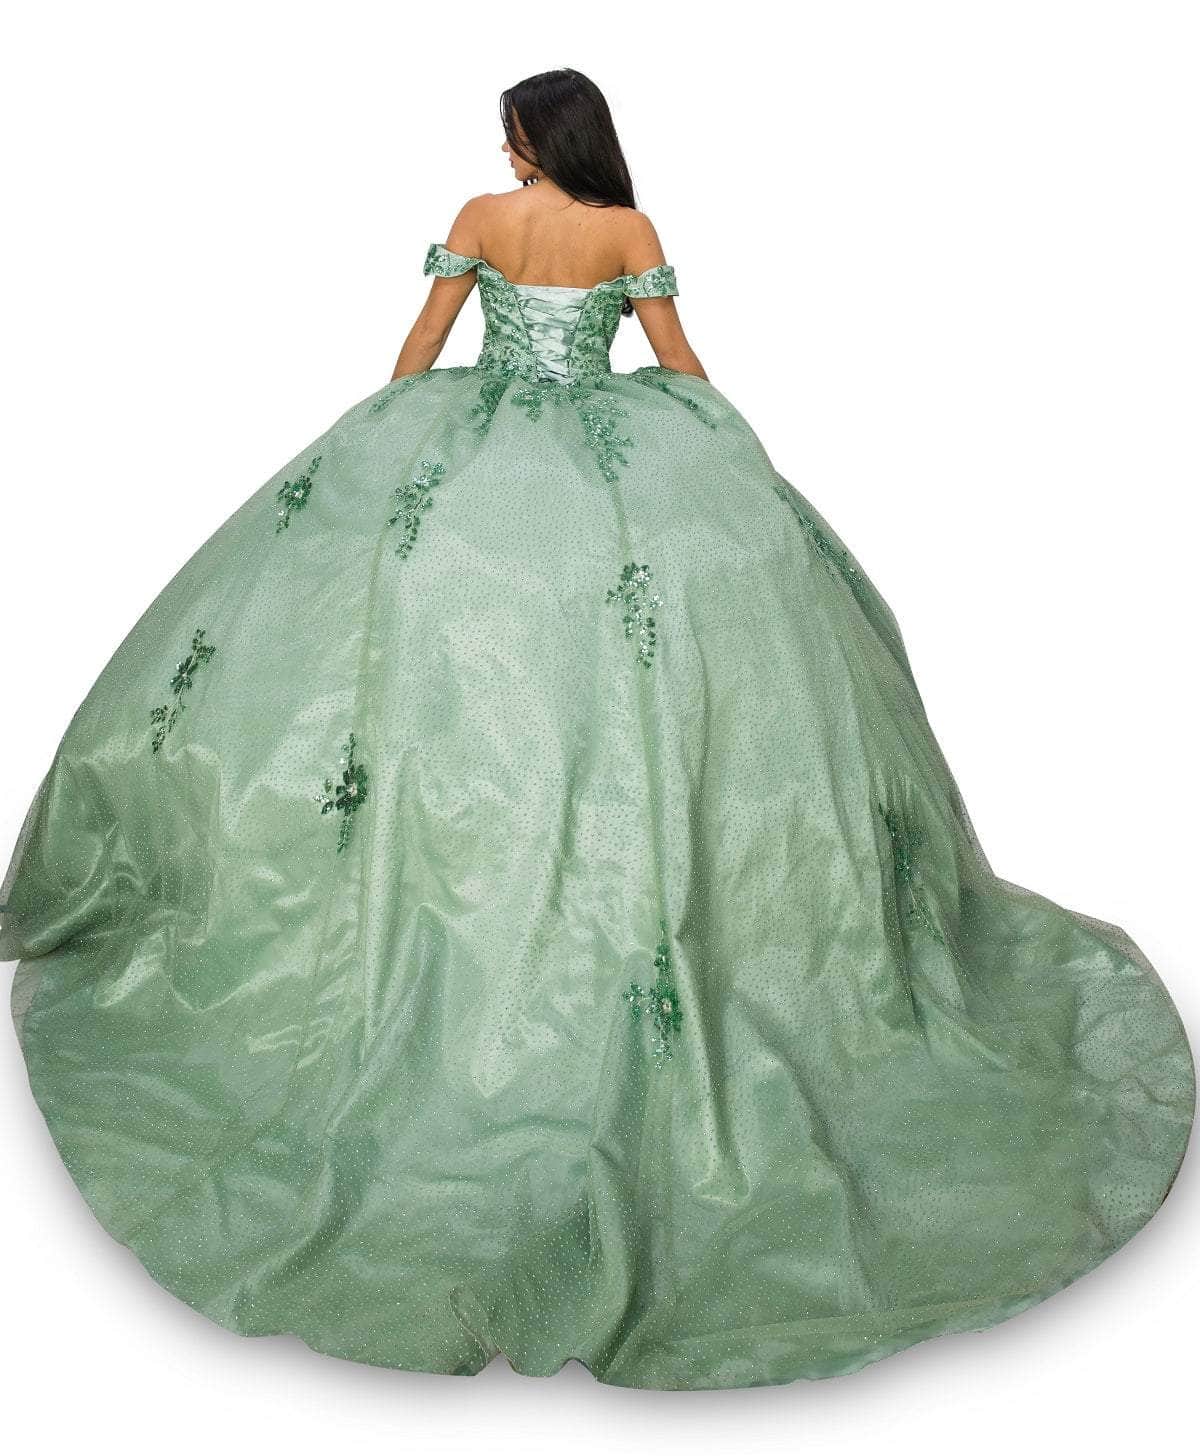 Cinderella Couture 8060J - Sweetheart Off-Shoulder Ballgown Special Occasion Dress